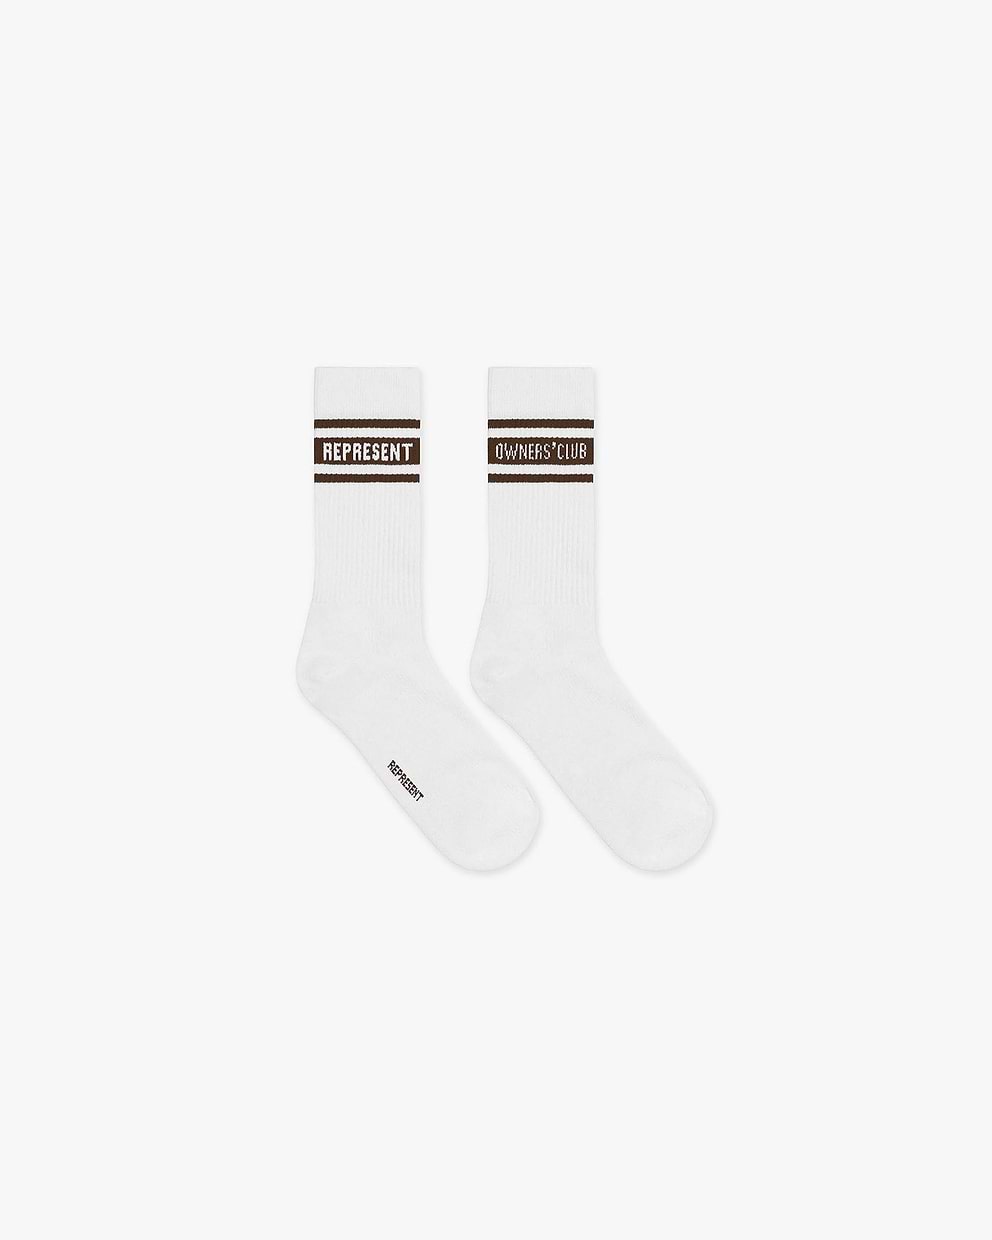 Represent Owners Club Socks | Flat White/Brown Accessories | REPRESENT CLO